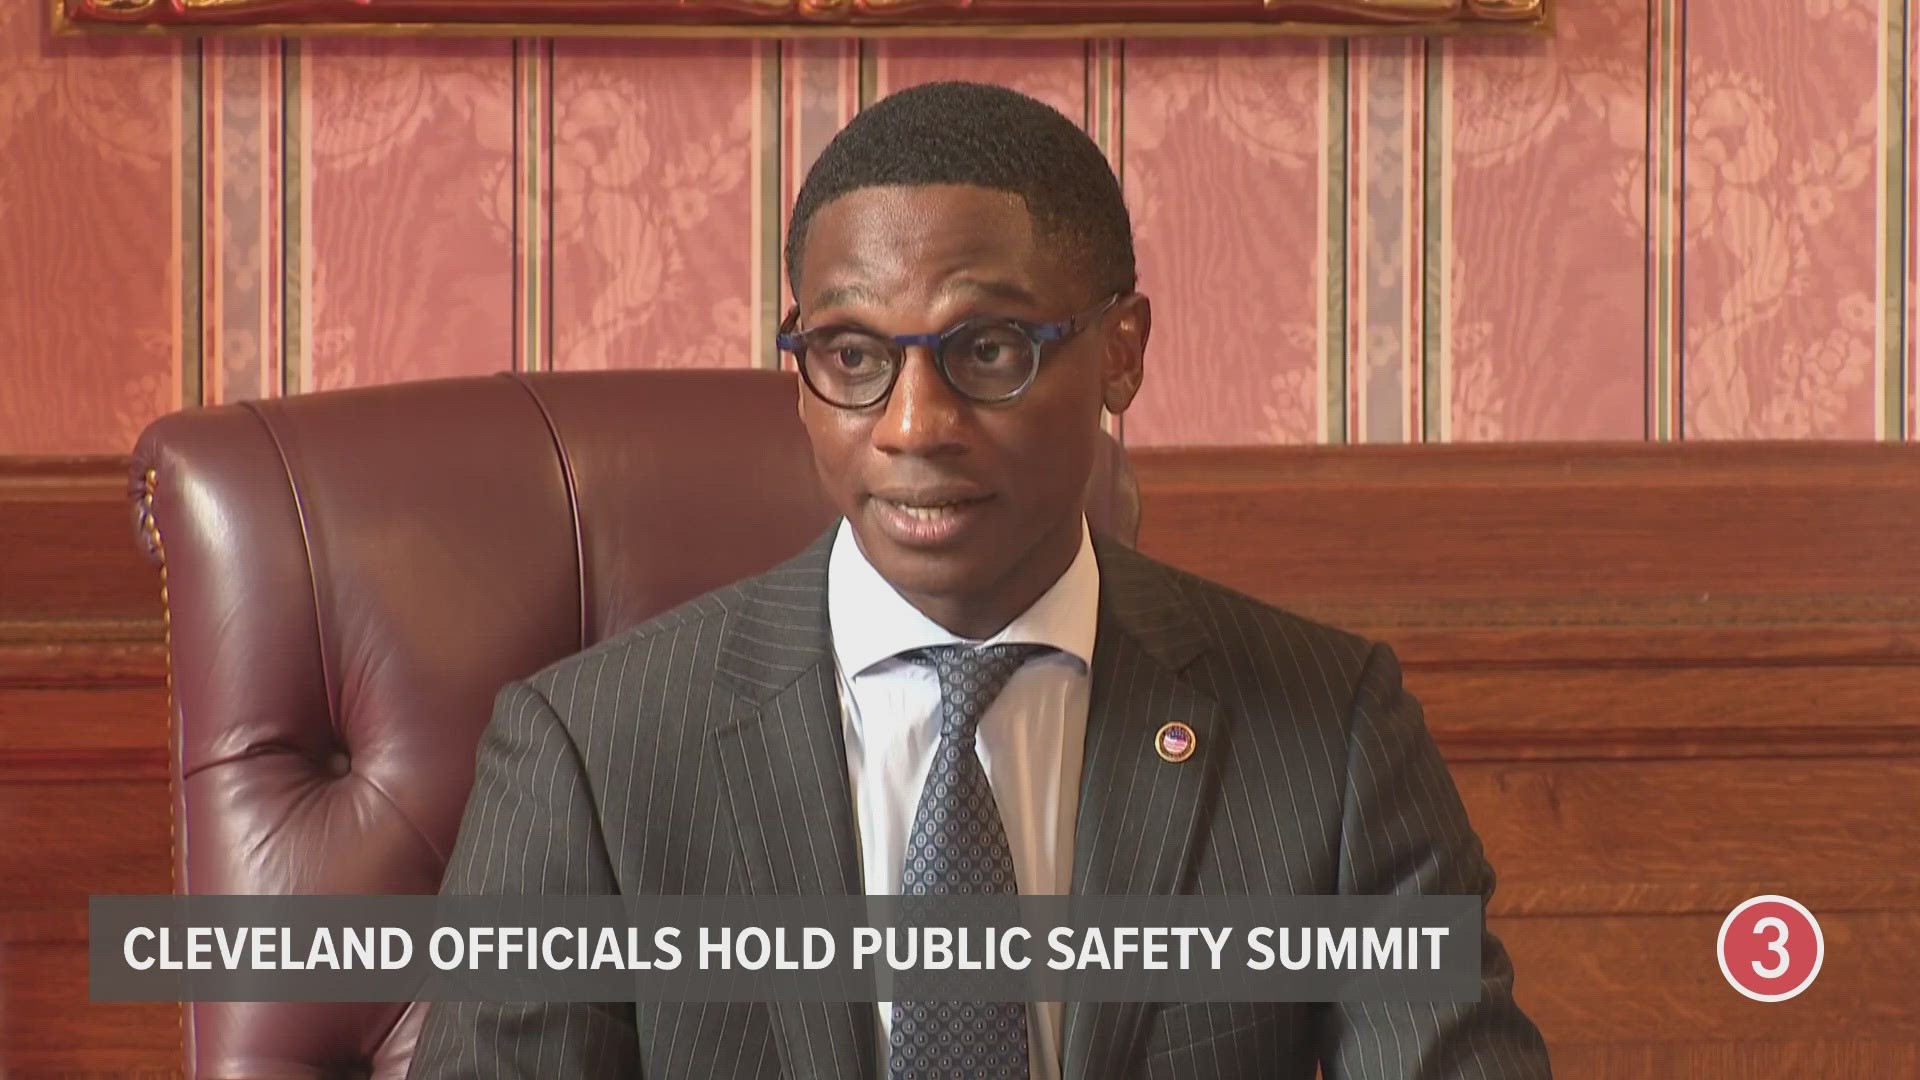 'We are in a war for talent right now across the country when it comes to law enforcement,' Cleveland Mayor Justin Bibb said during the safety summit.